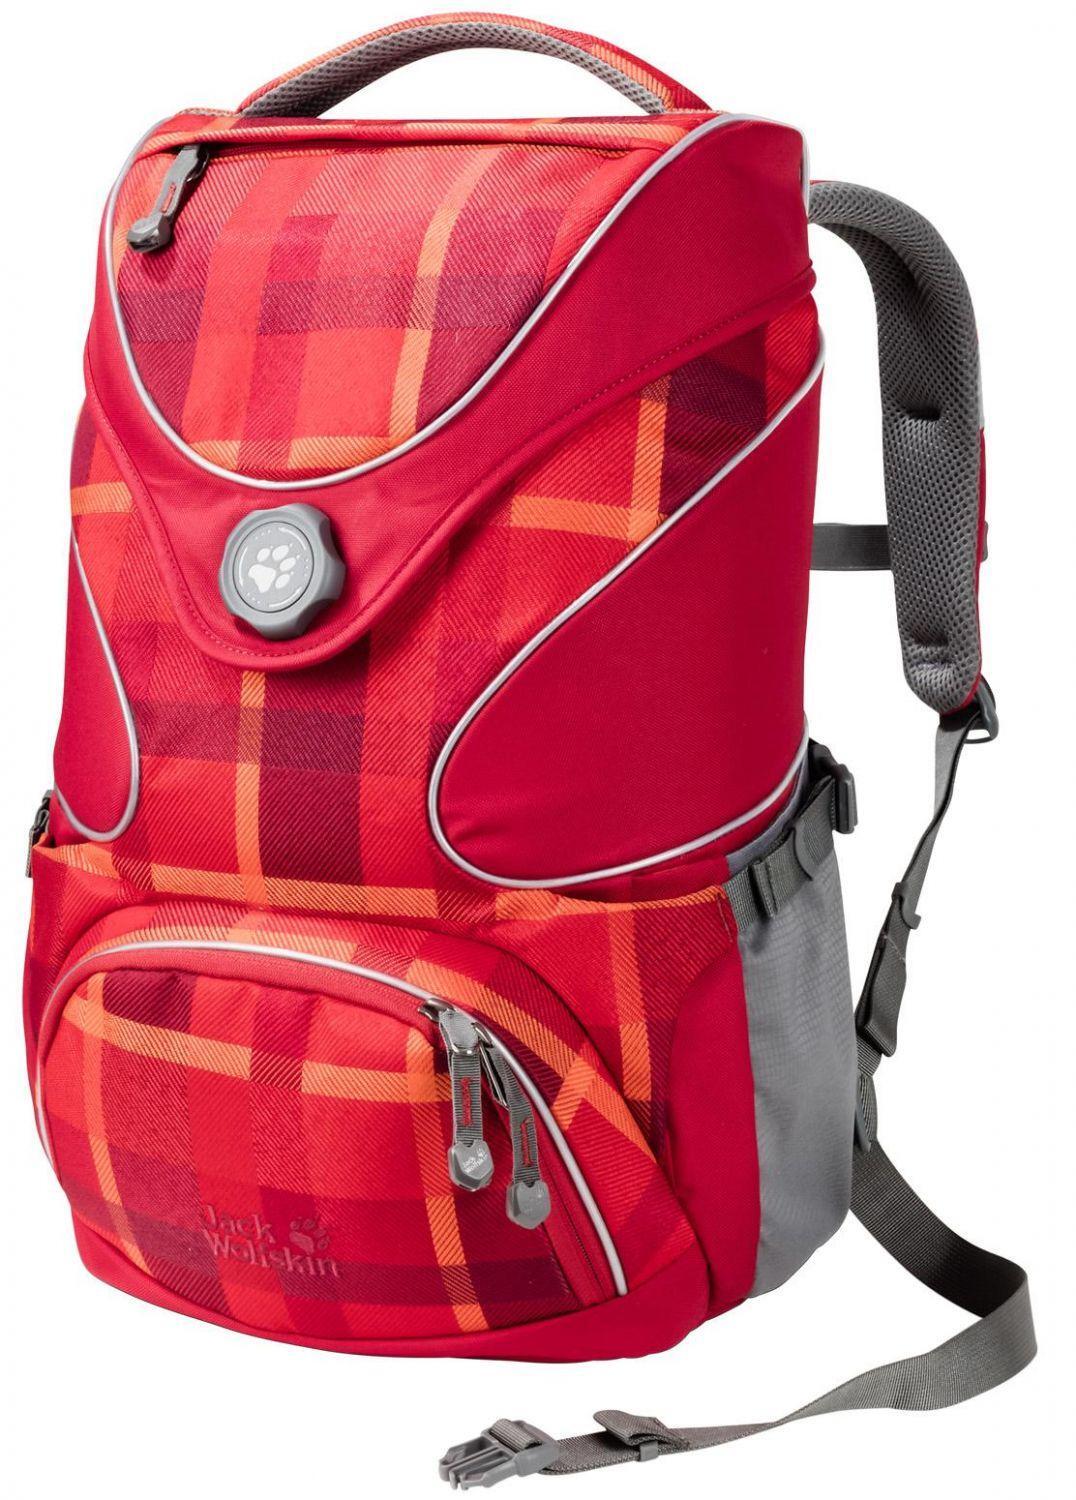 Jack Wolfskin ramson top 20 pack schulrucksack (farbe: 7941 indian red woven check)